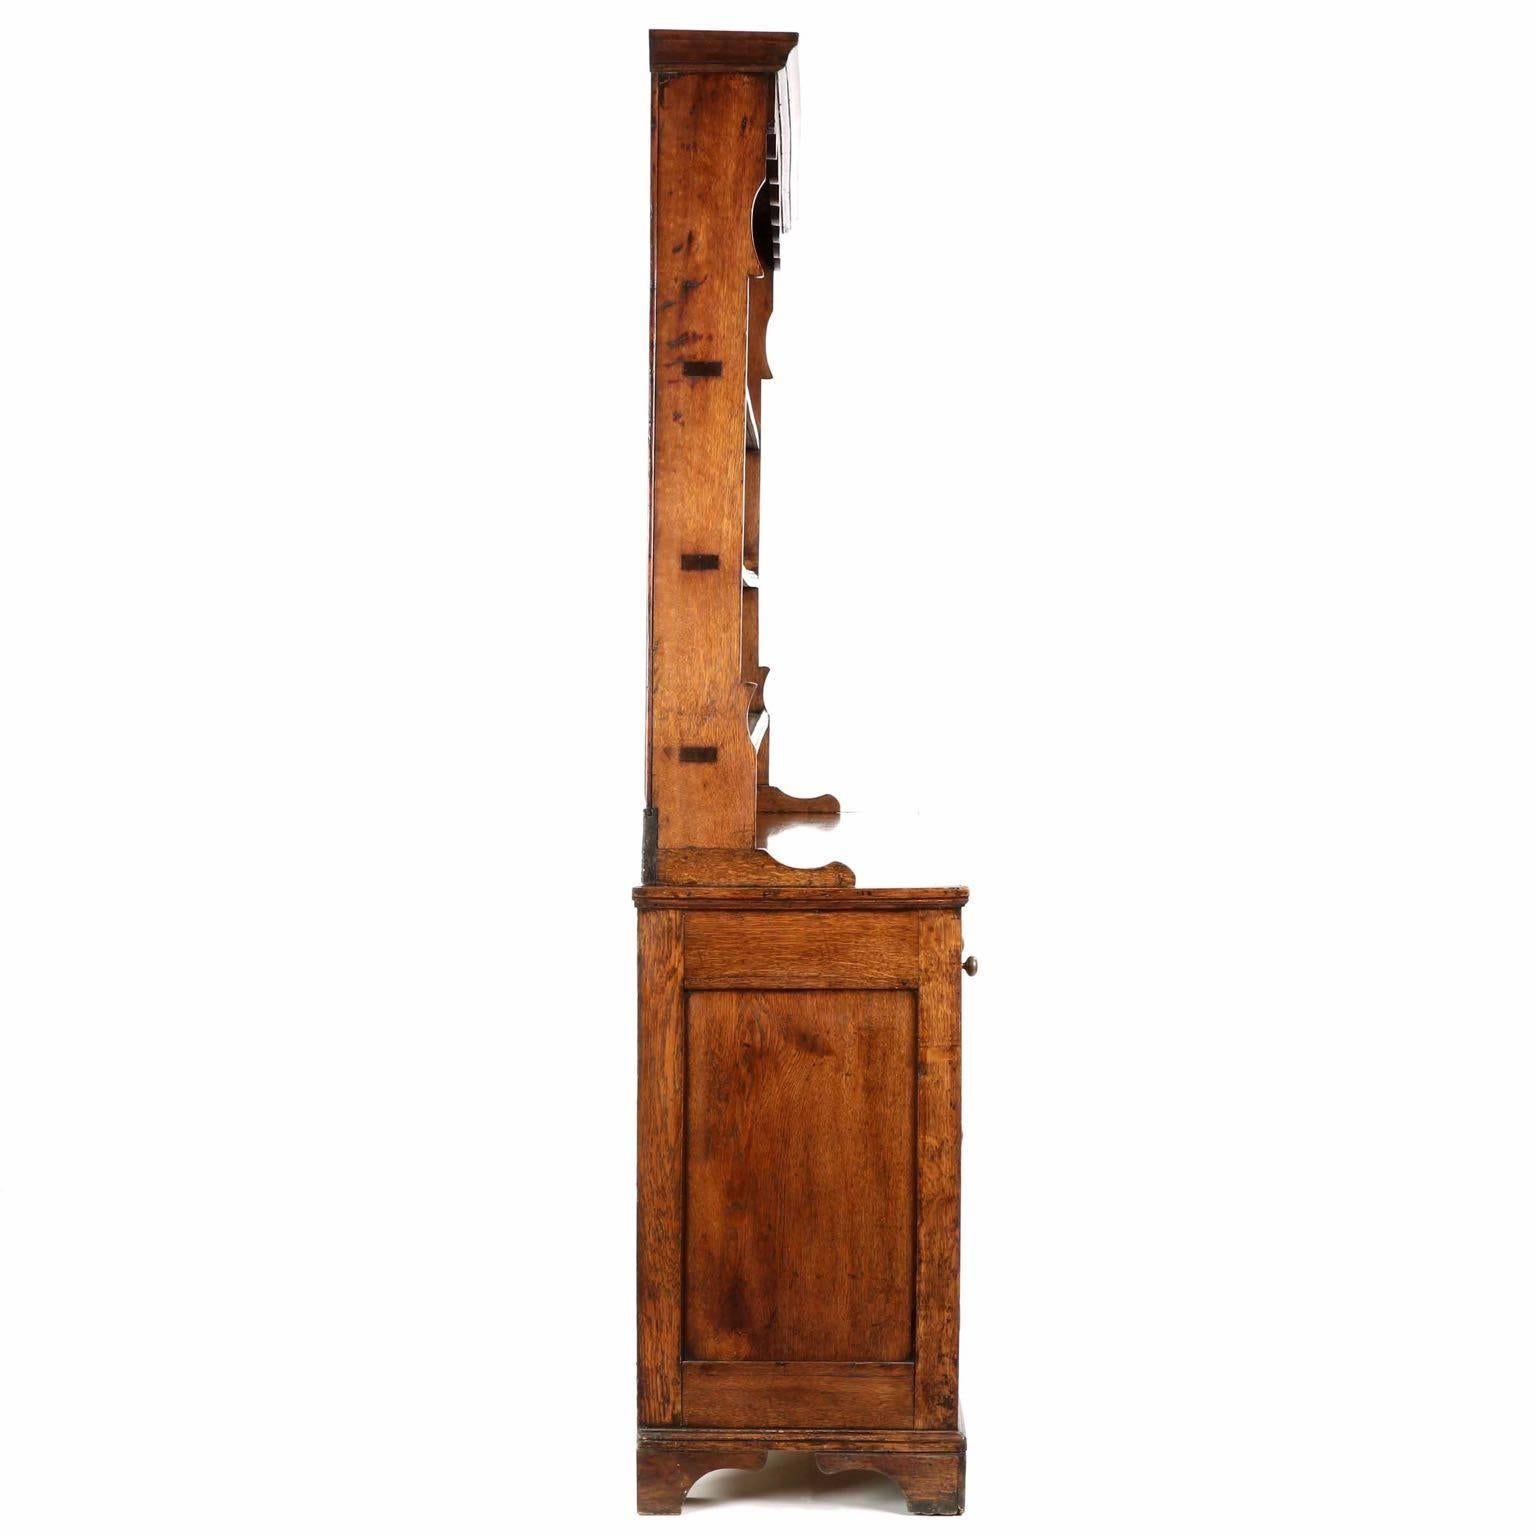 A gorgeous and early cupboard, probably crafted in England during the late 18th to early 19th century, this fine case piece remains in a very good condition with a deeply patinated golden oak surface throughout.  It is a two piece cupboard, allowing